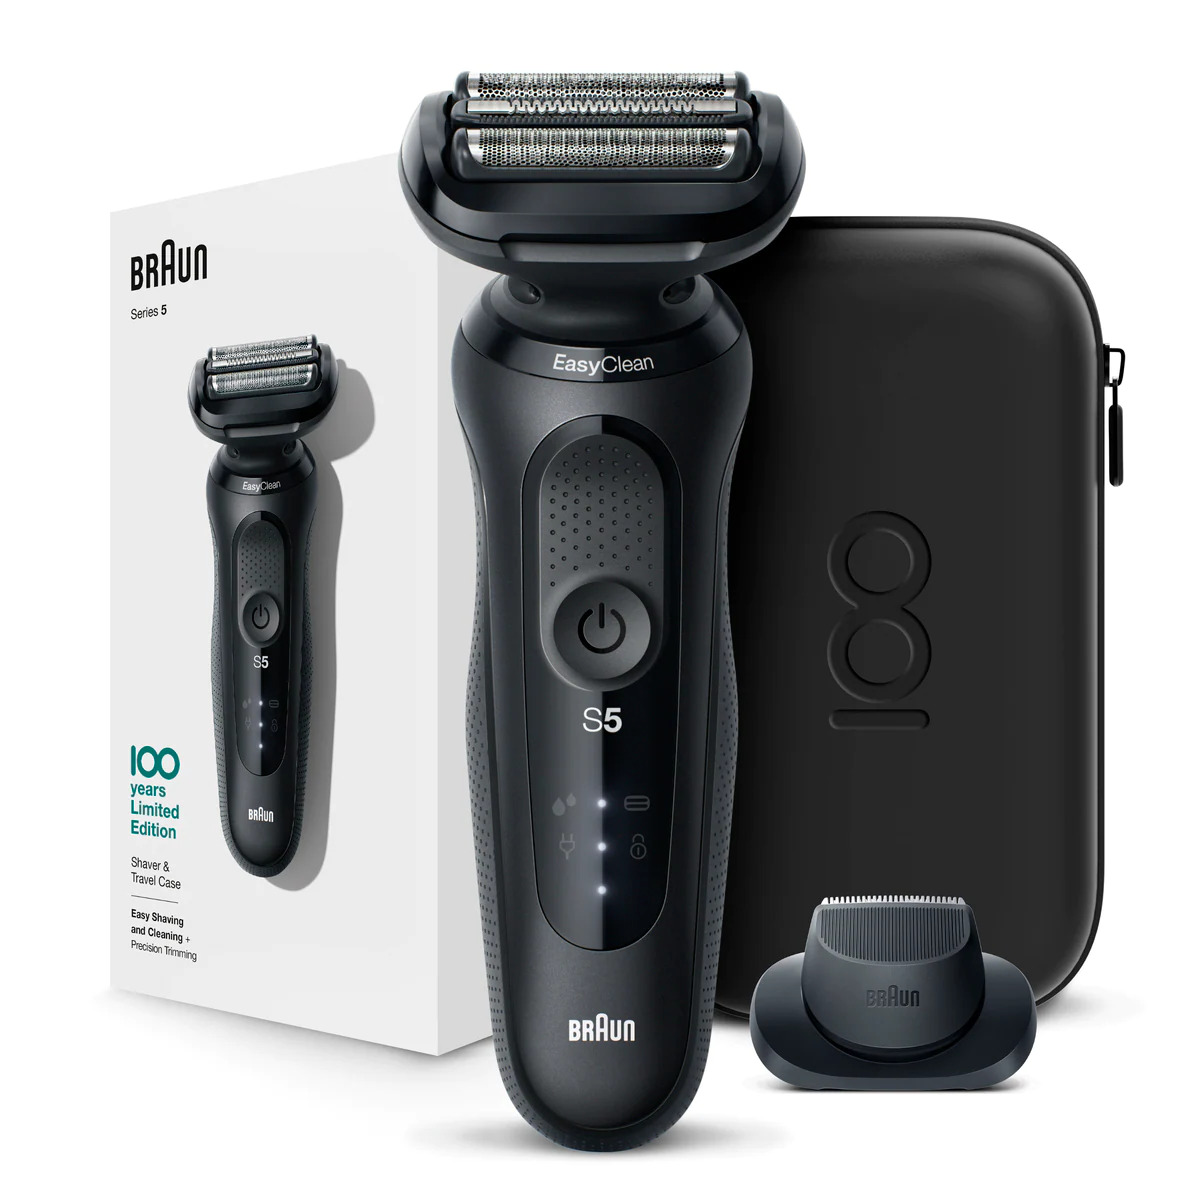 Braun 100 Years Limited Edition Series 5 Rechargeable Foil Shaver, Black - MBS5